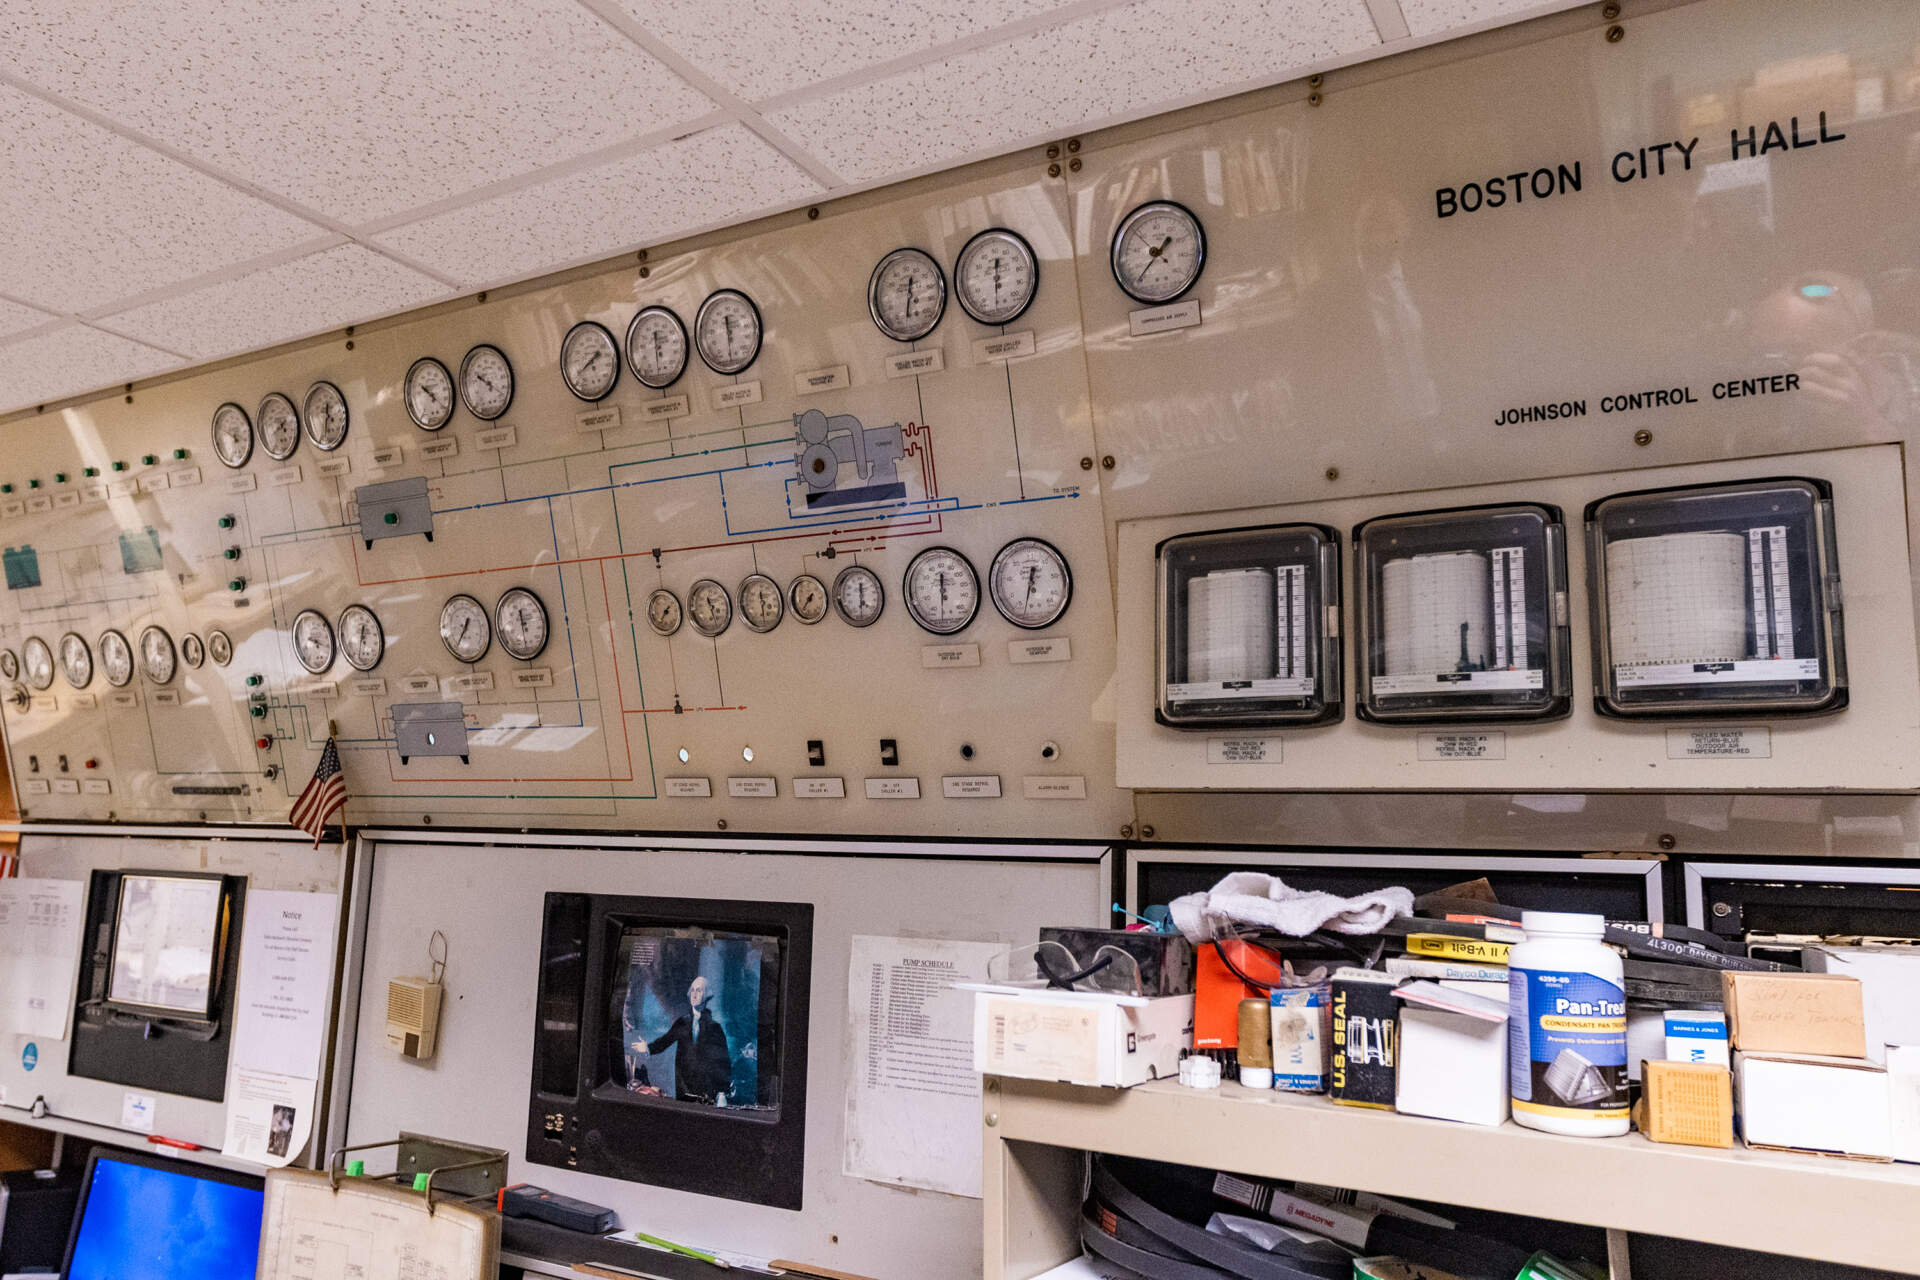 The original control panel for the HVAC system in City Hall no longer in use. (Jesse Costa/WBUR)